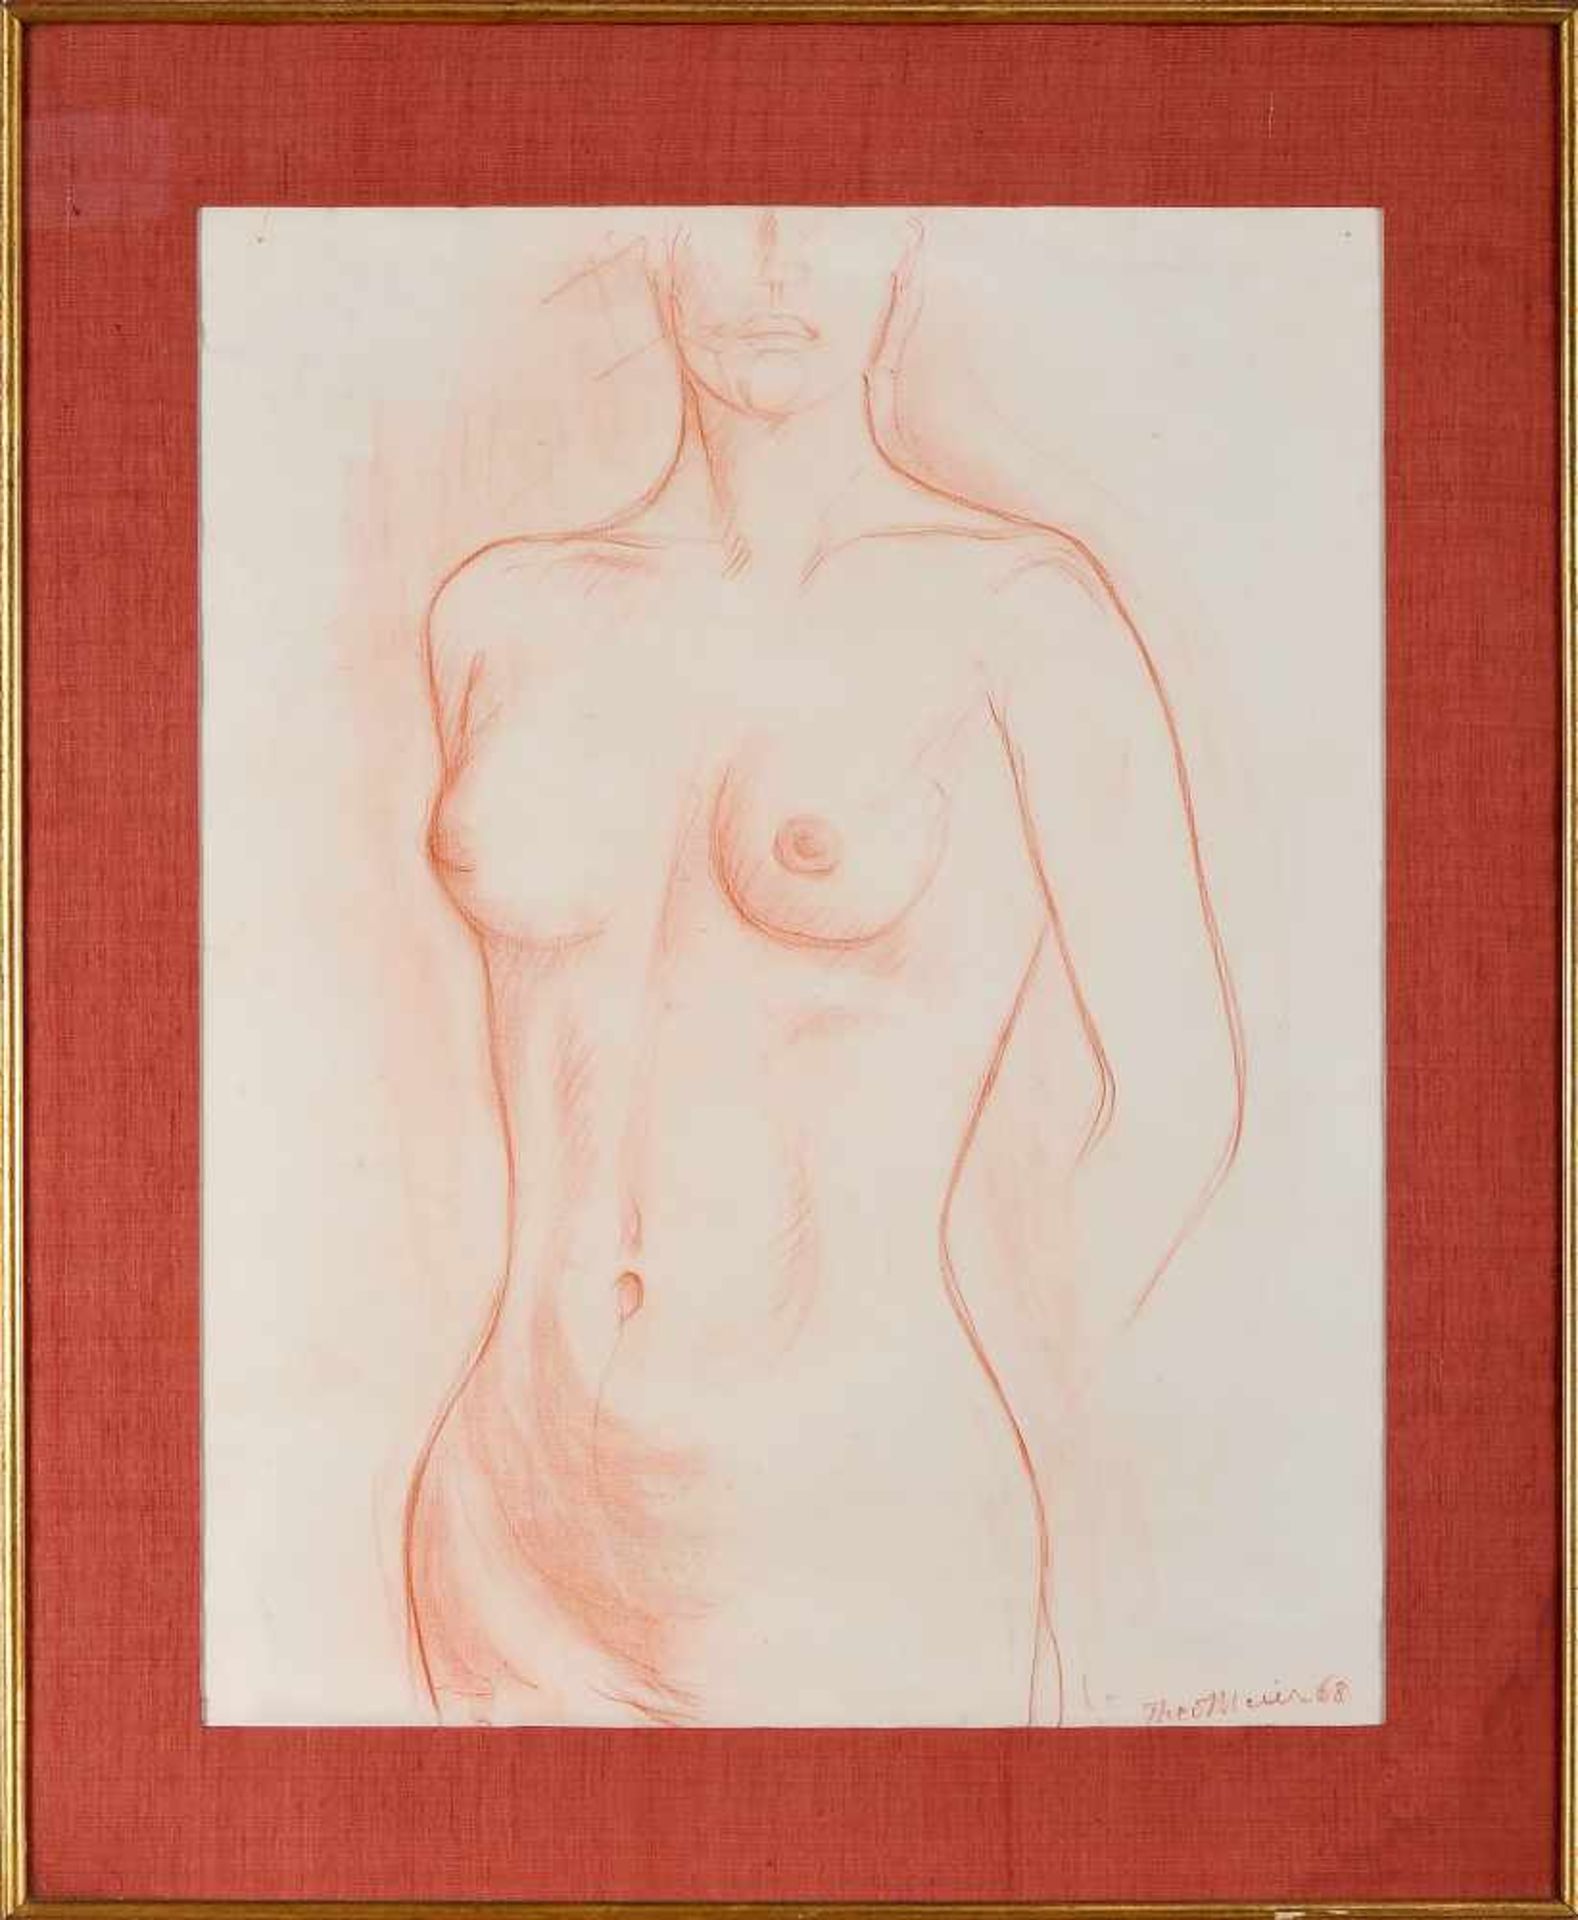 Untitled (Female Nude), pencil on paper, signed THEO MEIER (probably Theo Meier - 1908-1982) and